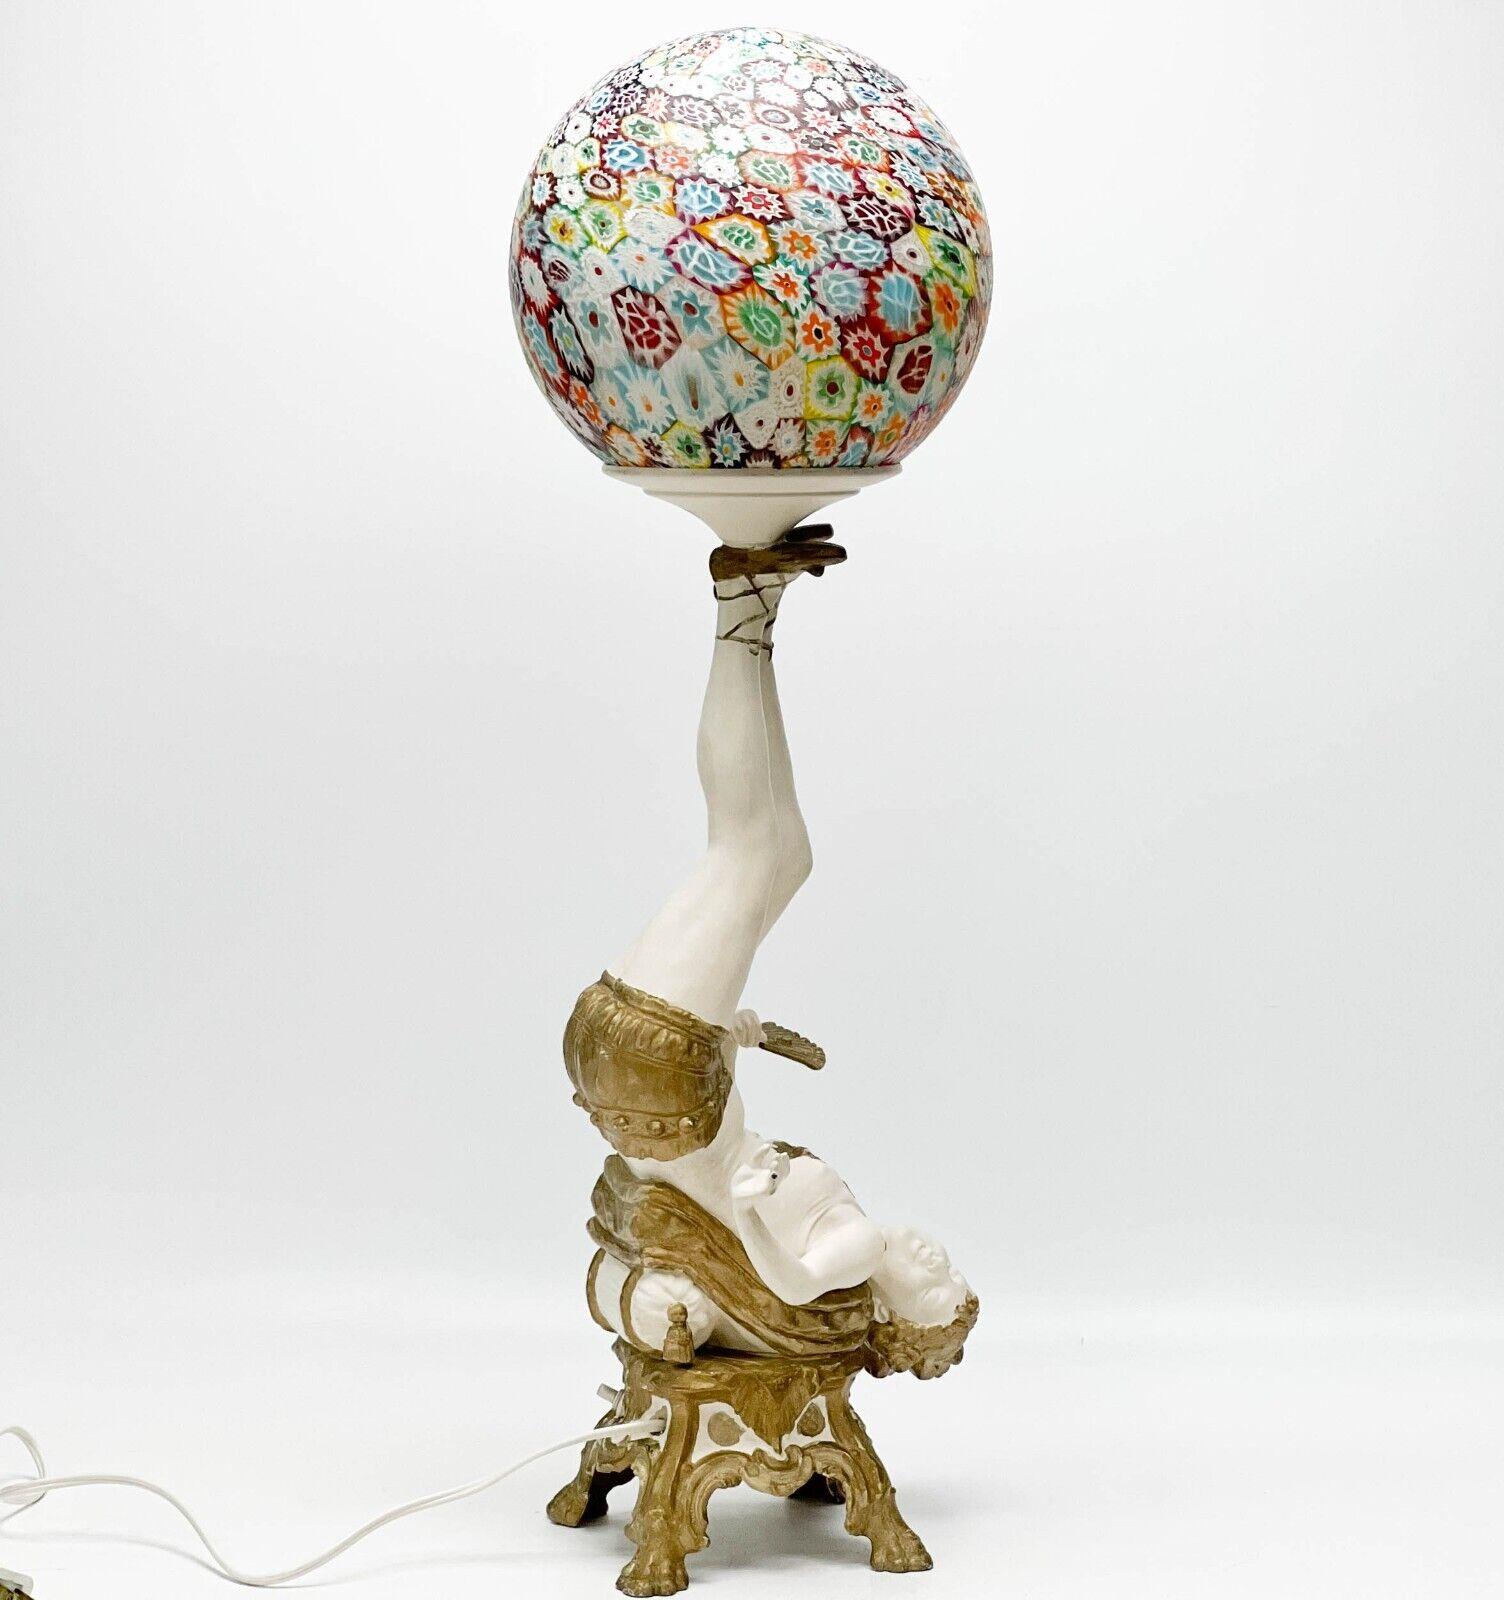 American bronze Murano millifori glass burlesque dancer lamp, 2nd quarter 20th century. The gilt and cold painted bronze or heavy cast metal stem of the lamp depicts a Burlesque dancer upside down holding a hand fan. Murano Millifiori glass globe to